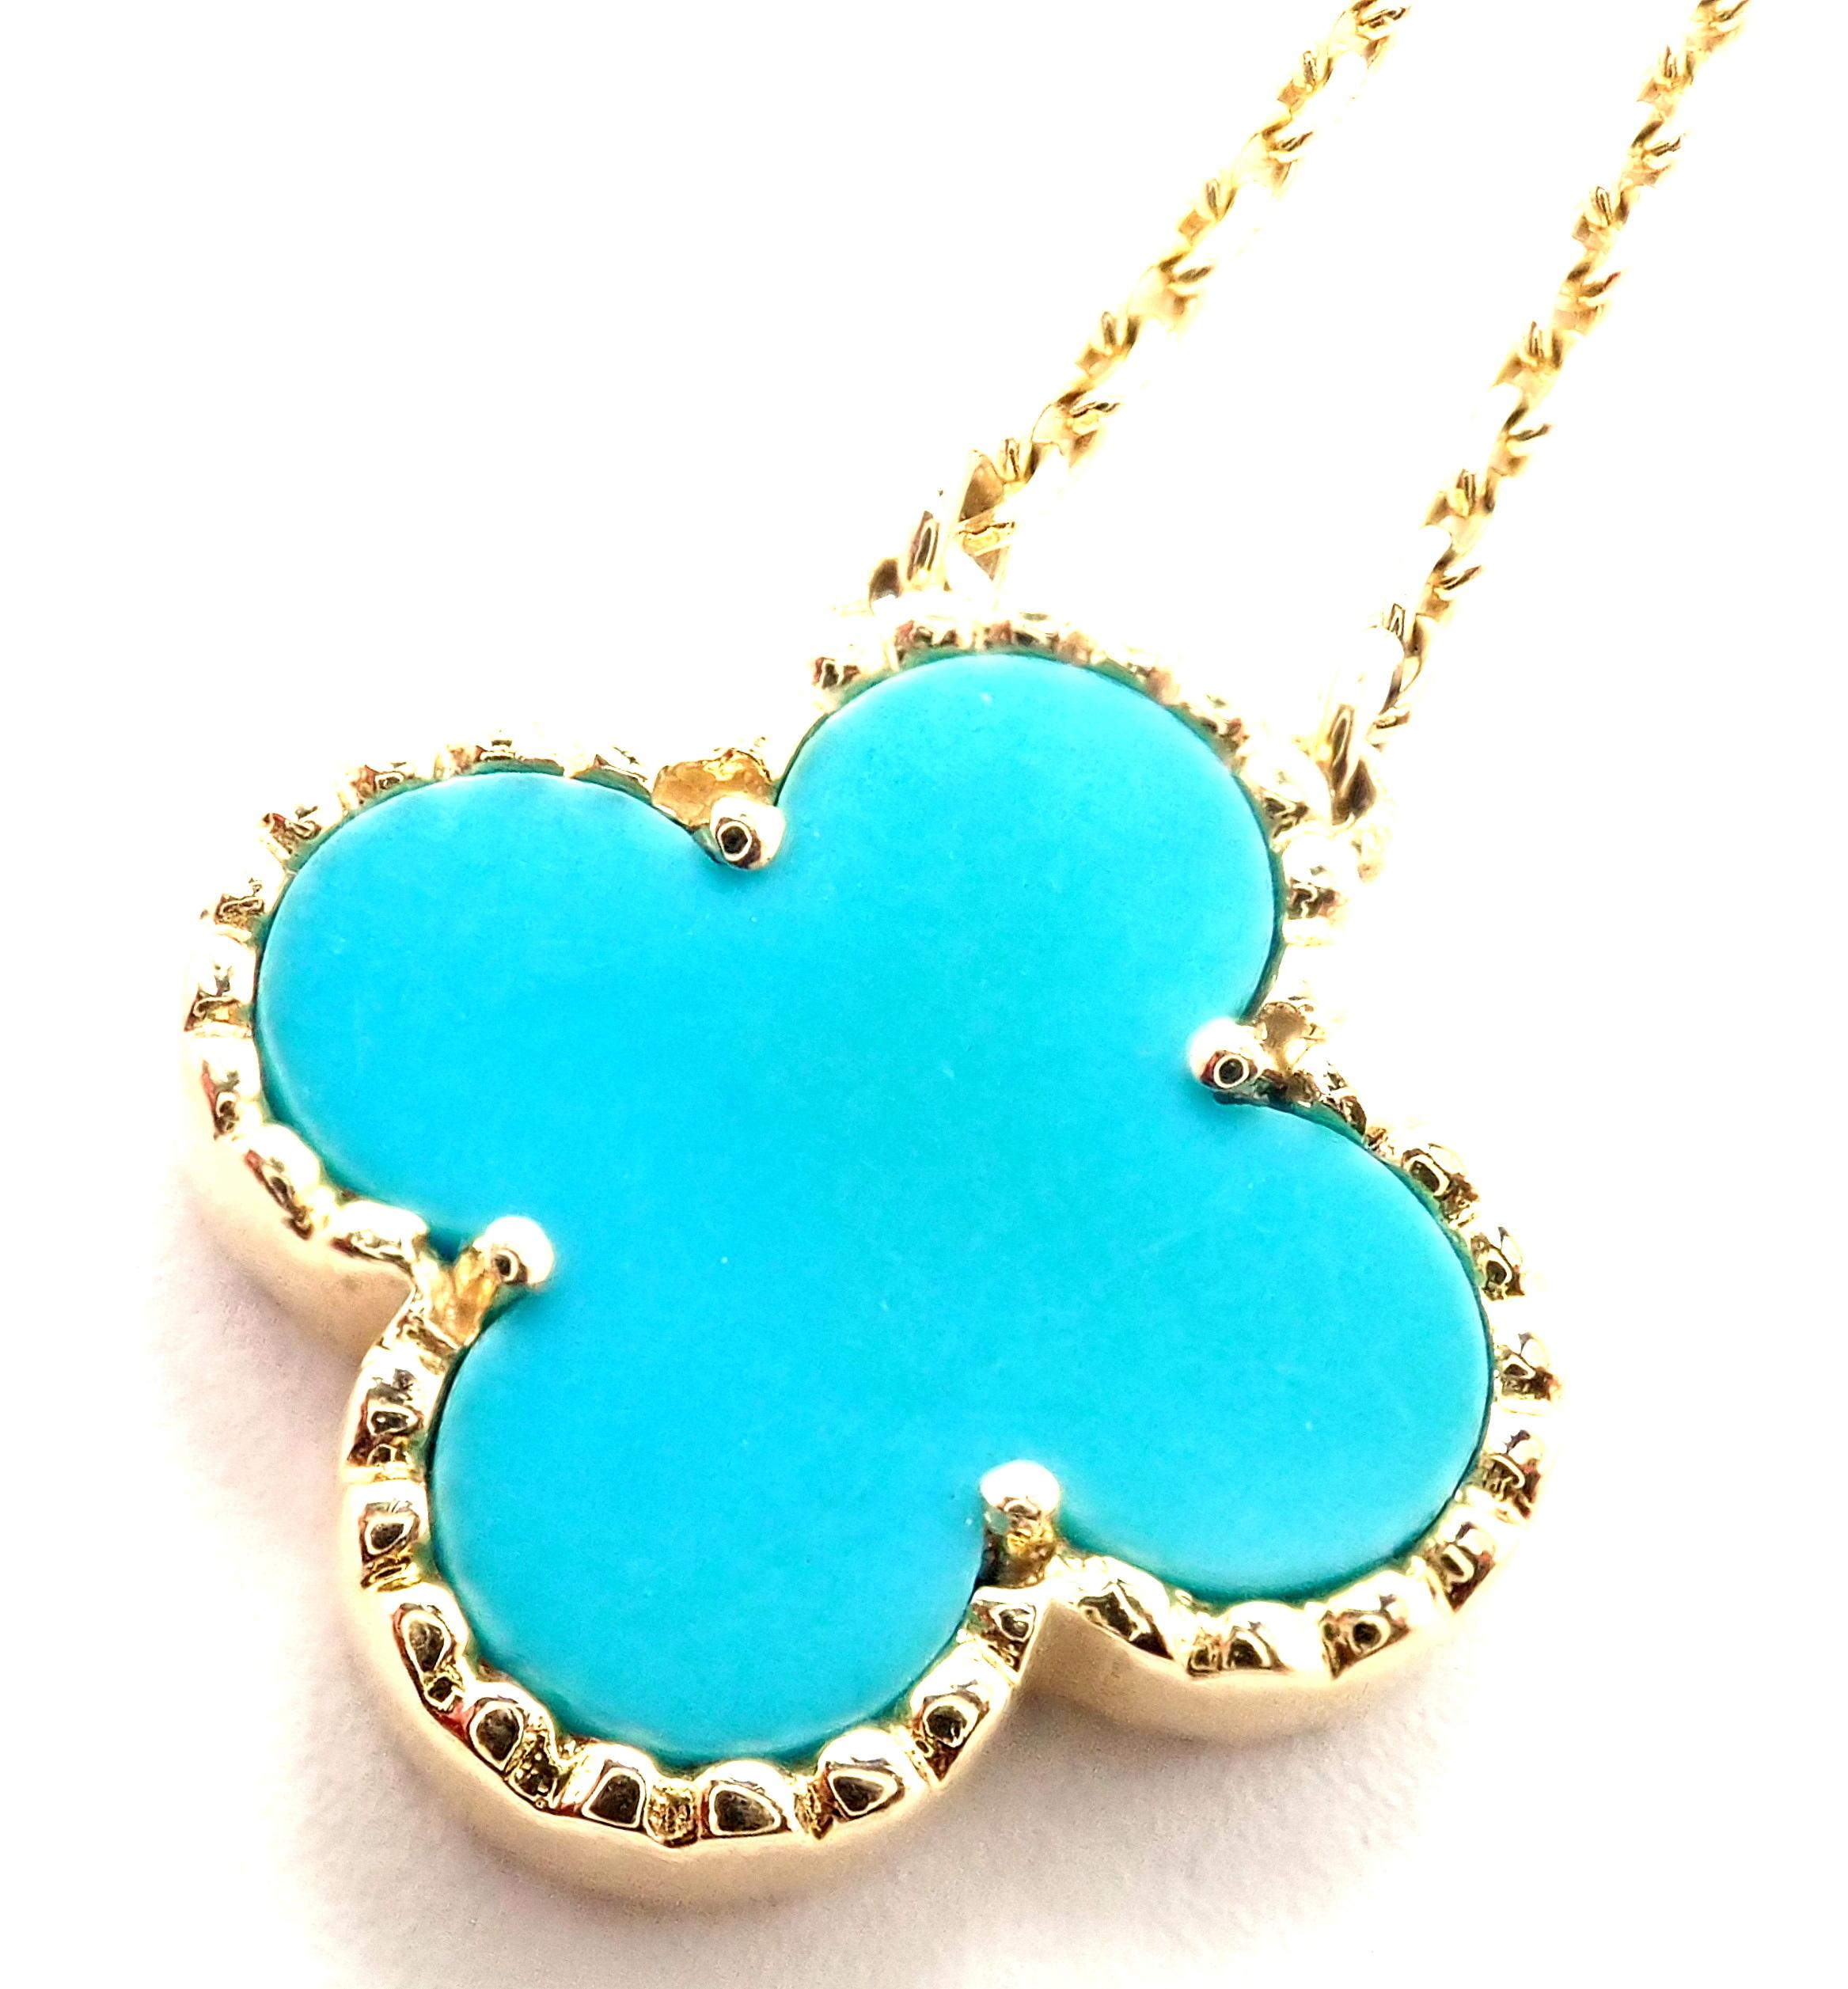 18k Yellow Gold Vintage Alhambra Turquoise Pendant Necklace by Van Cleef & Arpels. 
With one 15mm motif of turquoise alhambra stone.
This necklace comes with service paper from Van Cleef & Arpels store.
Details: 
Length: 17